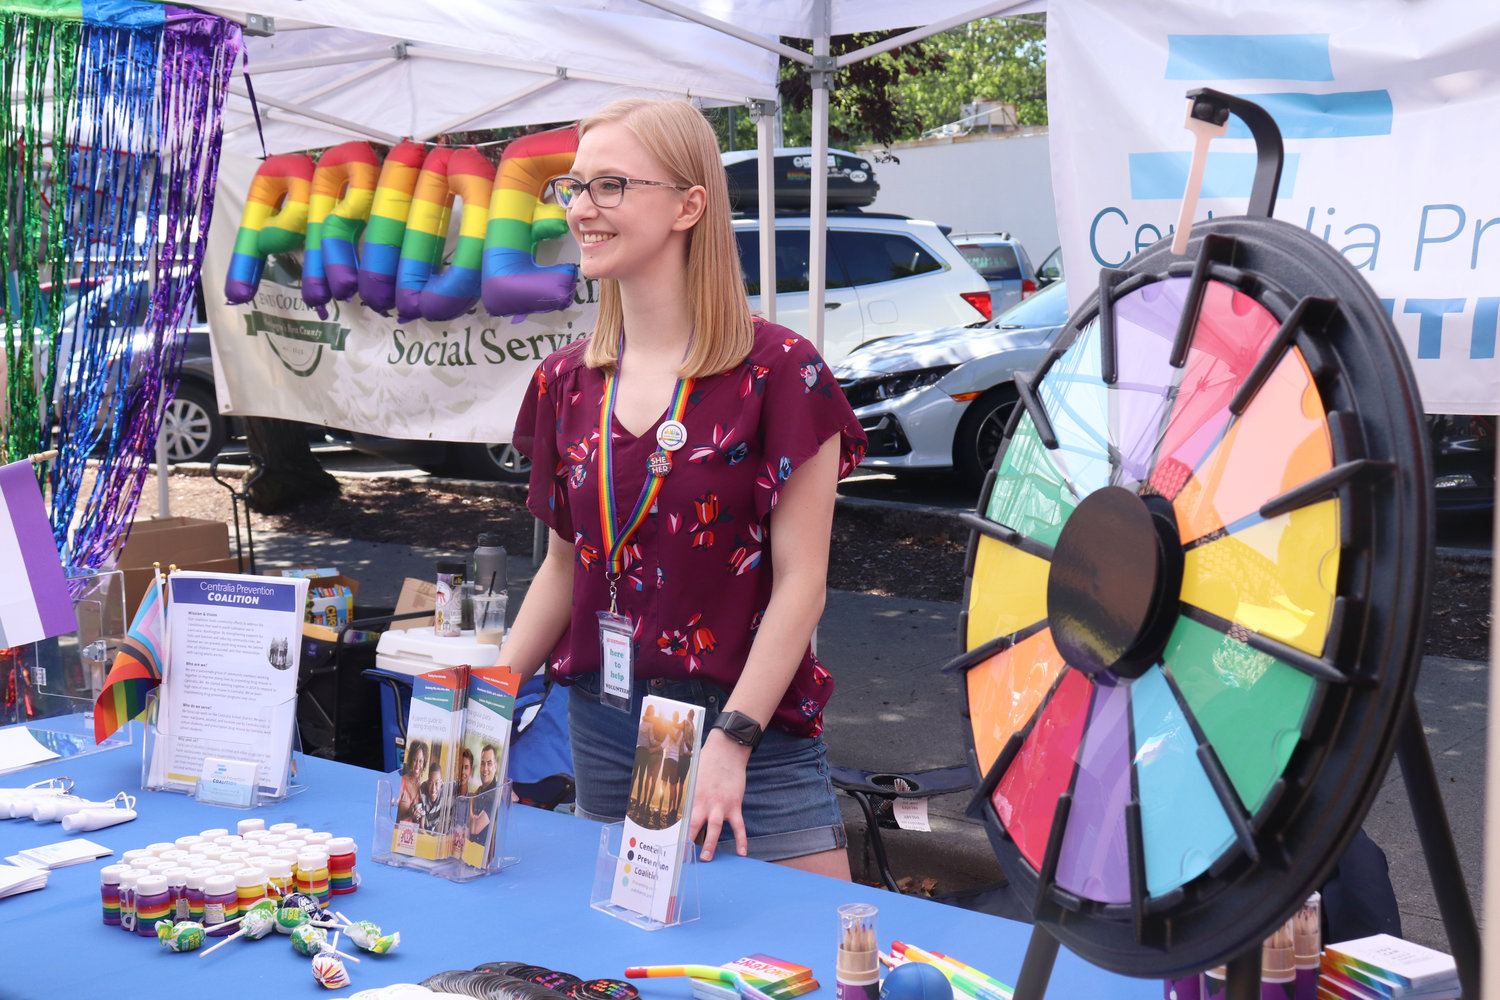 Sara Bumgardner of the Centralia Prevention Coalition attends a rainbow prize wheel at Lewis County Pride in Centralia on Saturday.